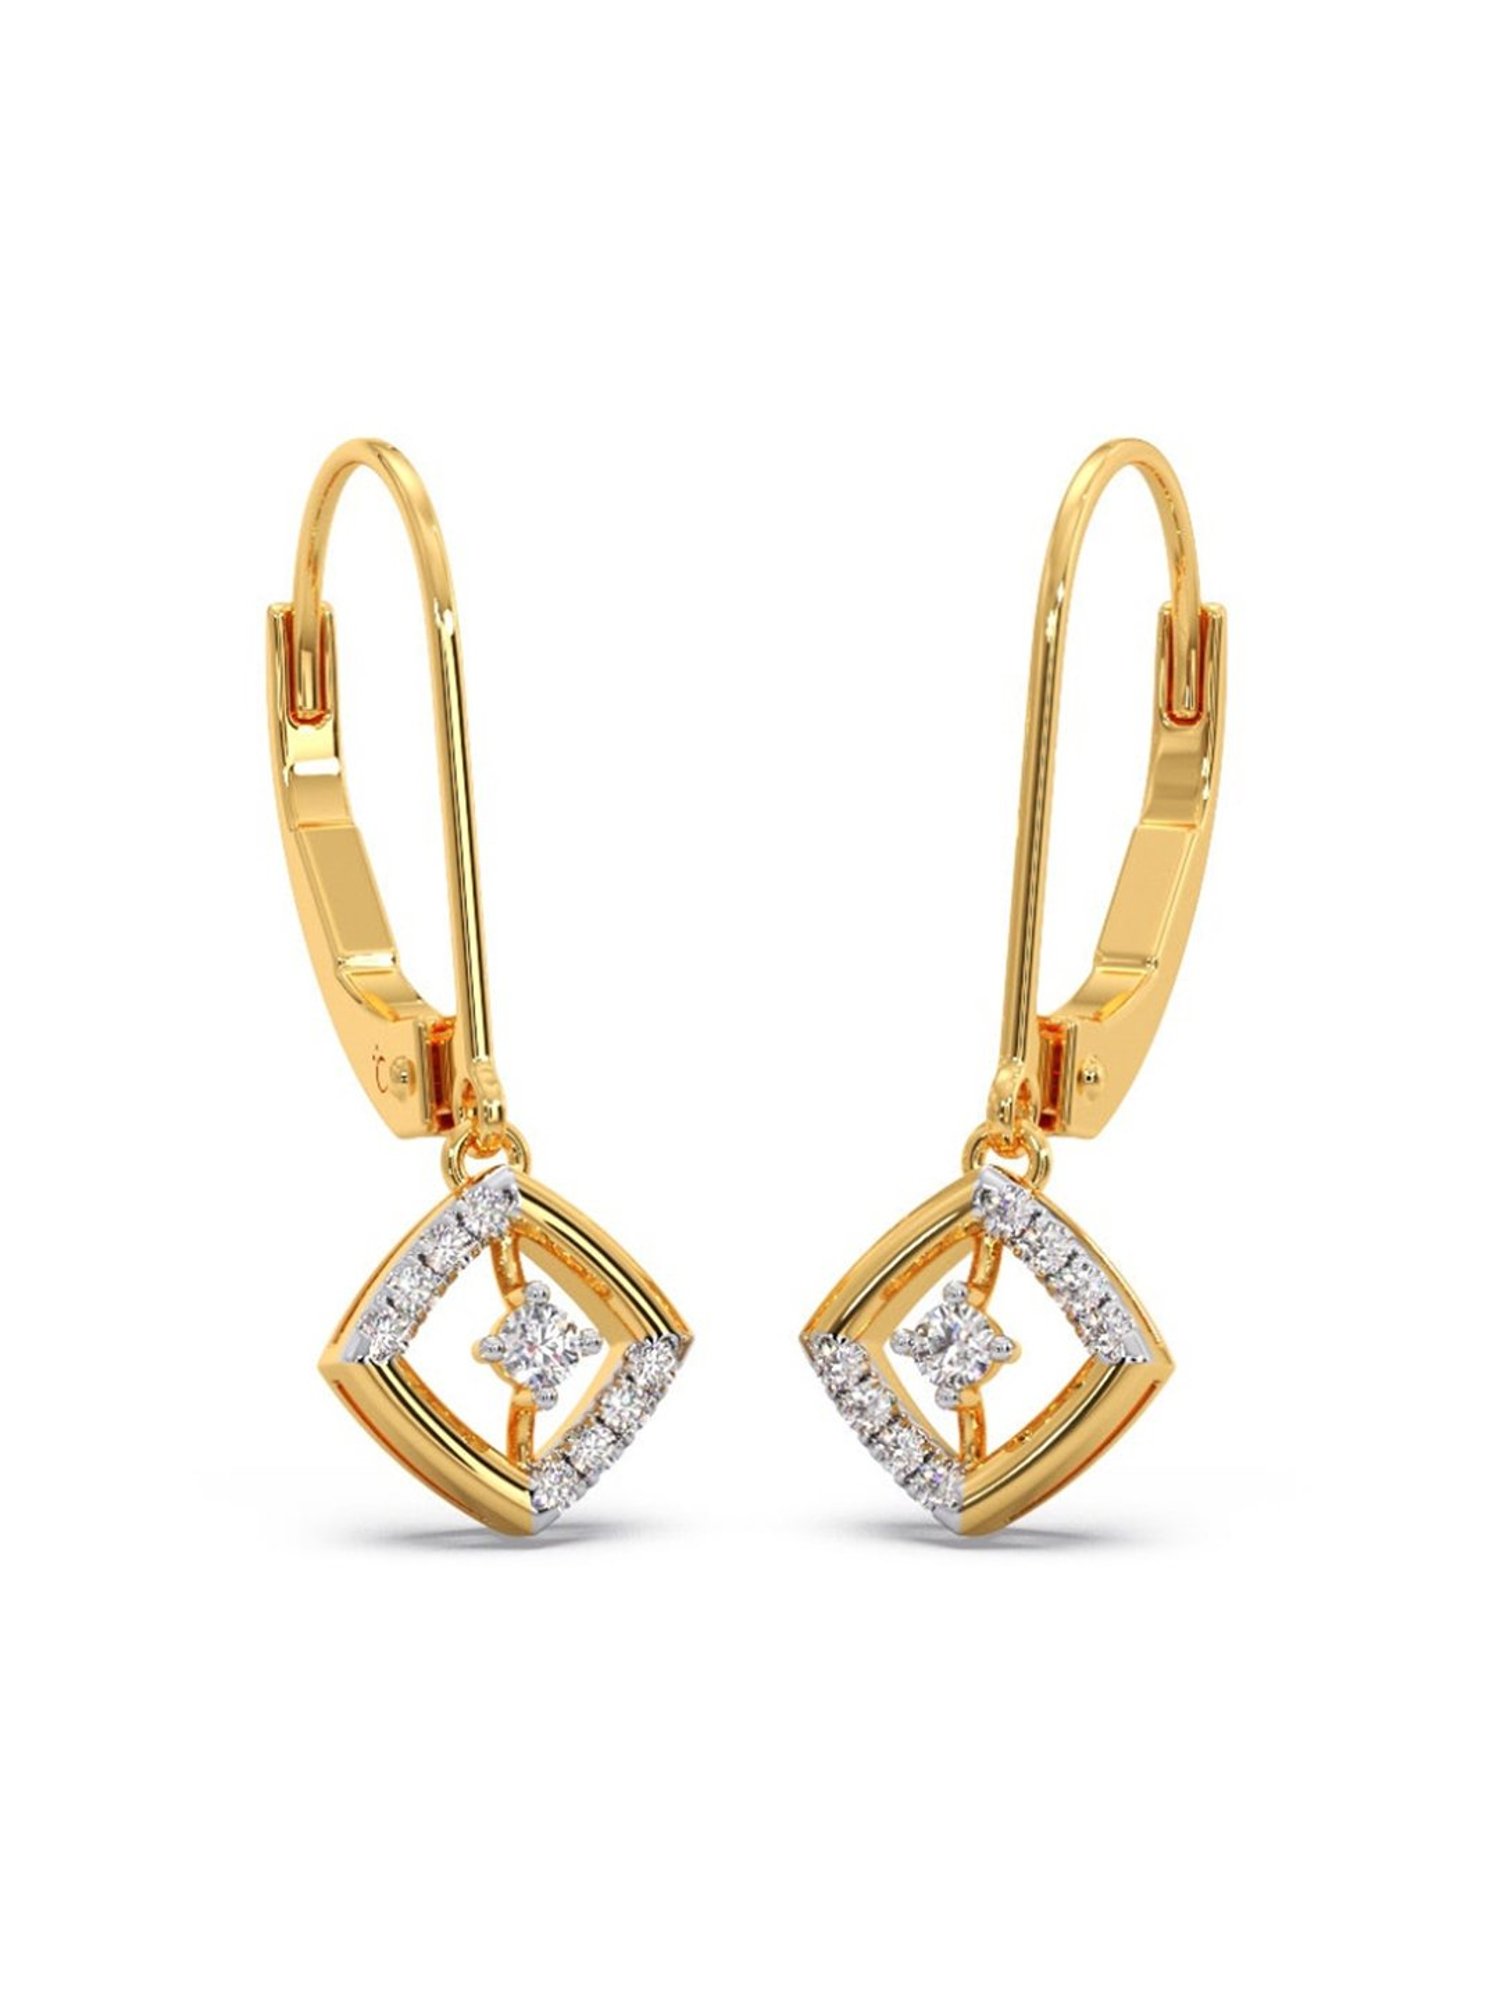 CANDERE - A KALYAN JEWELLERS COMPANY 18KT Yellow Gold and Diamond Stud  Earrings for Women : Amazon.in: Fashion